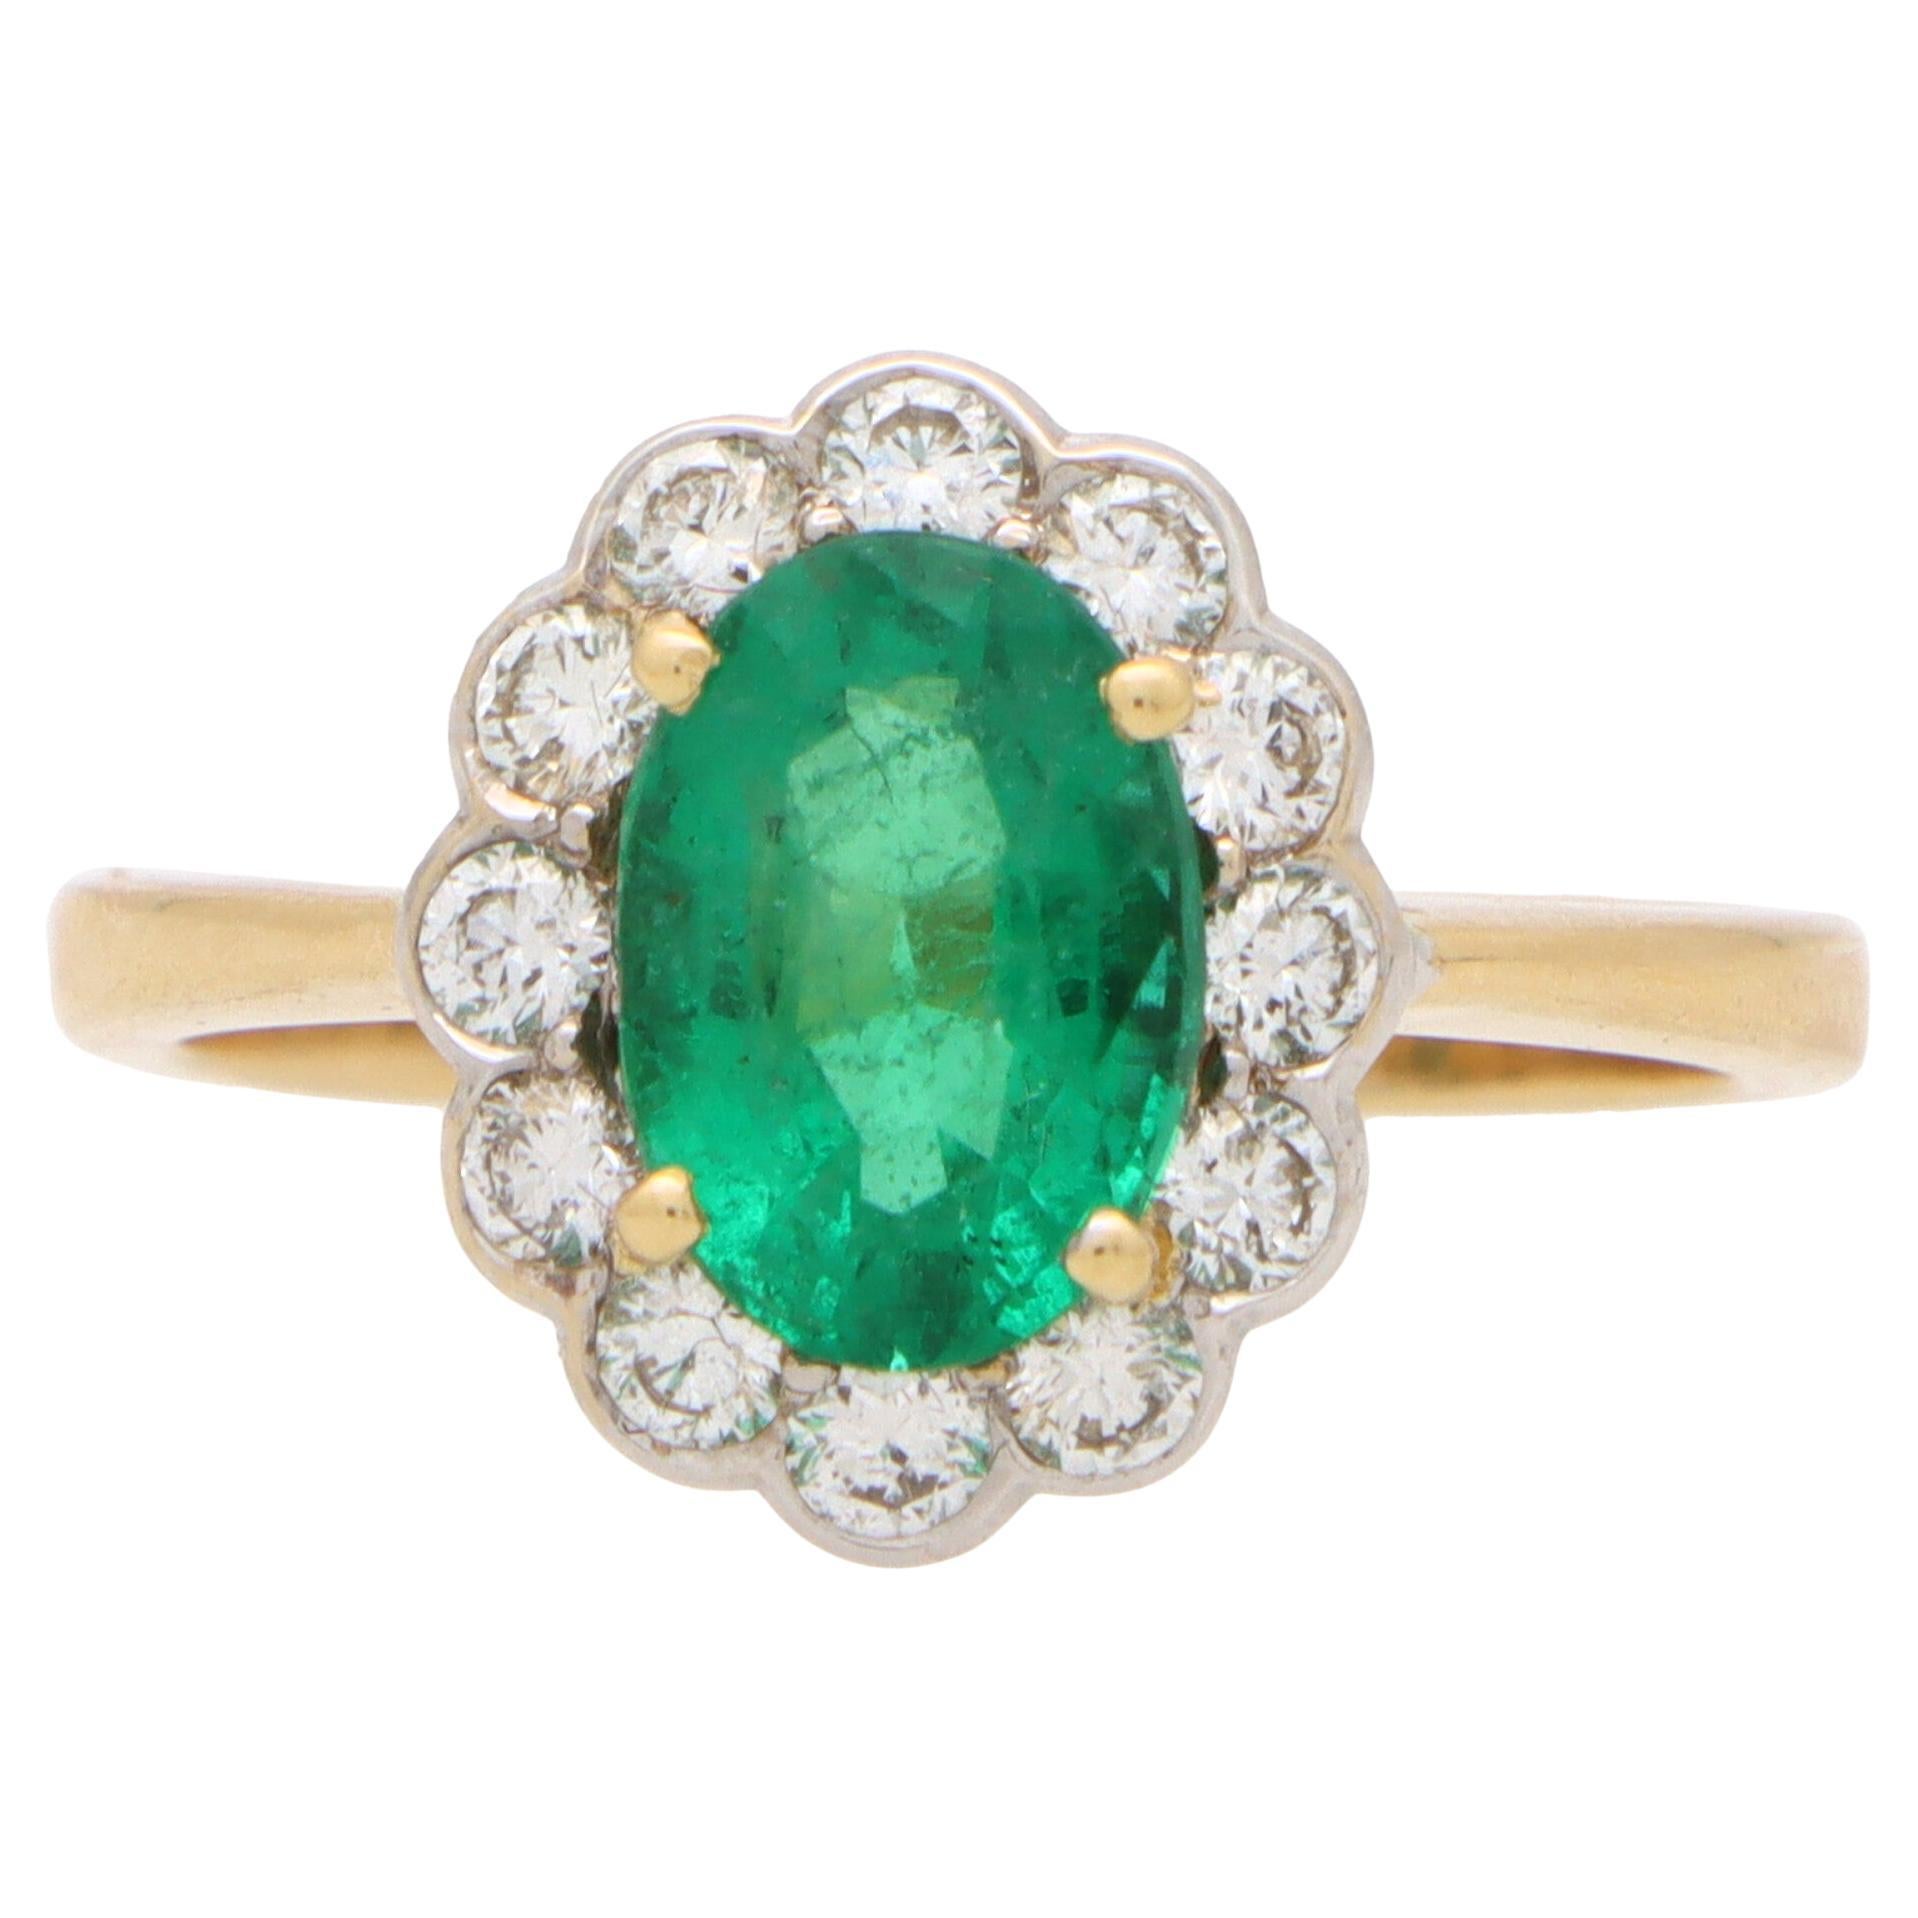 Contemporary Emerald and Diamond Floral Cluster Ring Set in 18k Gold